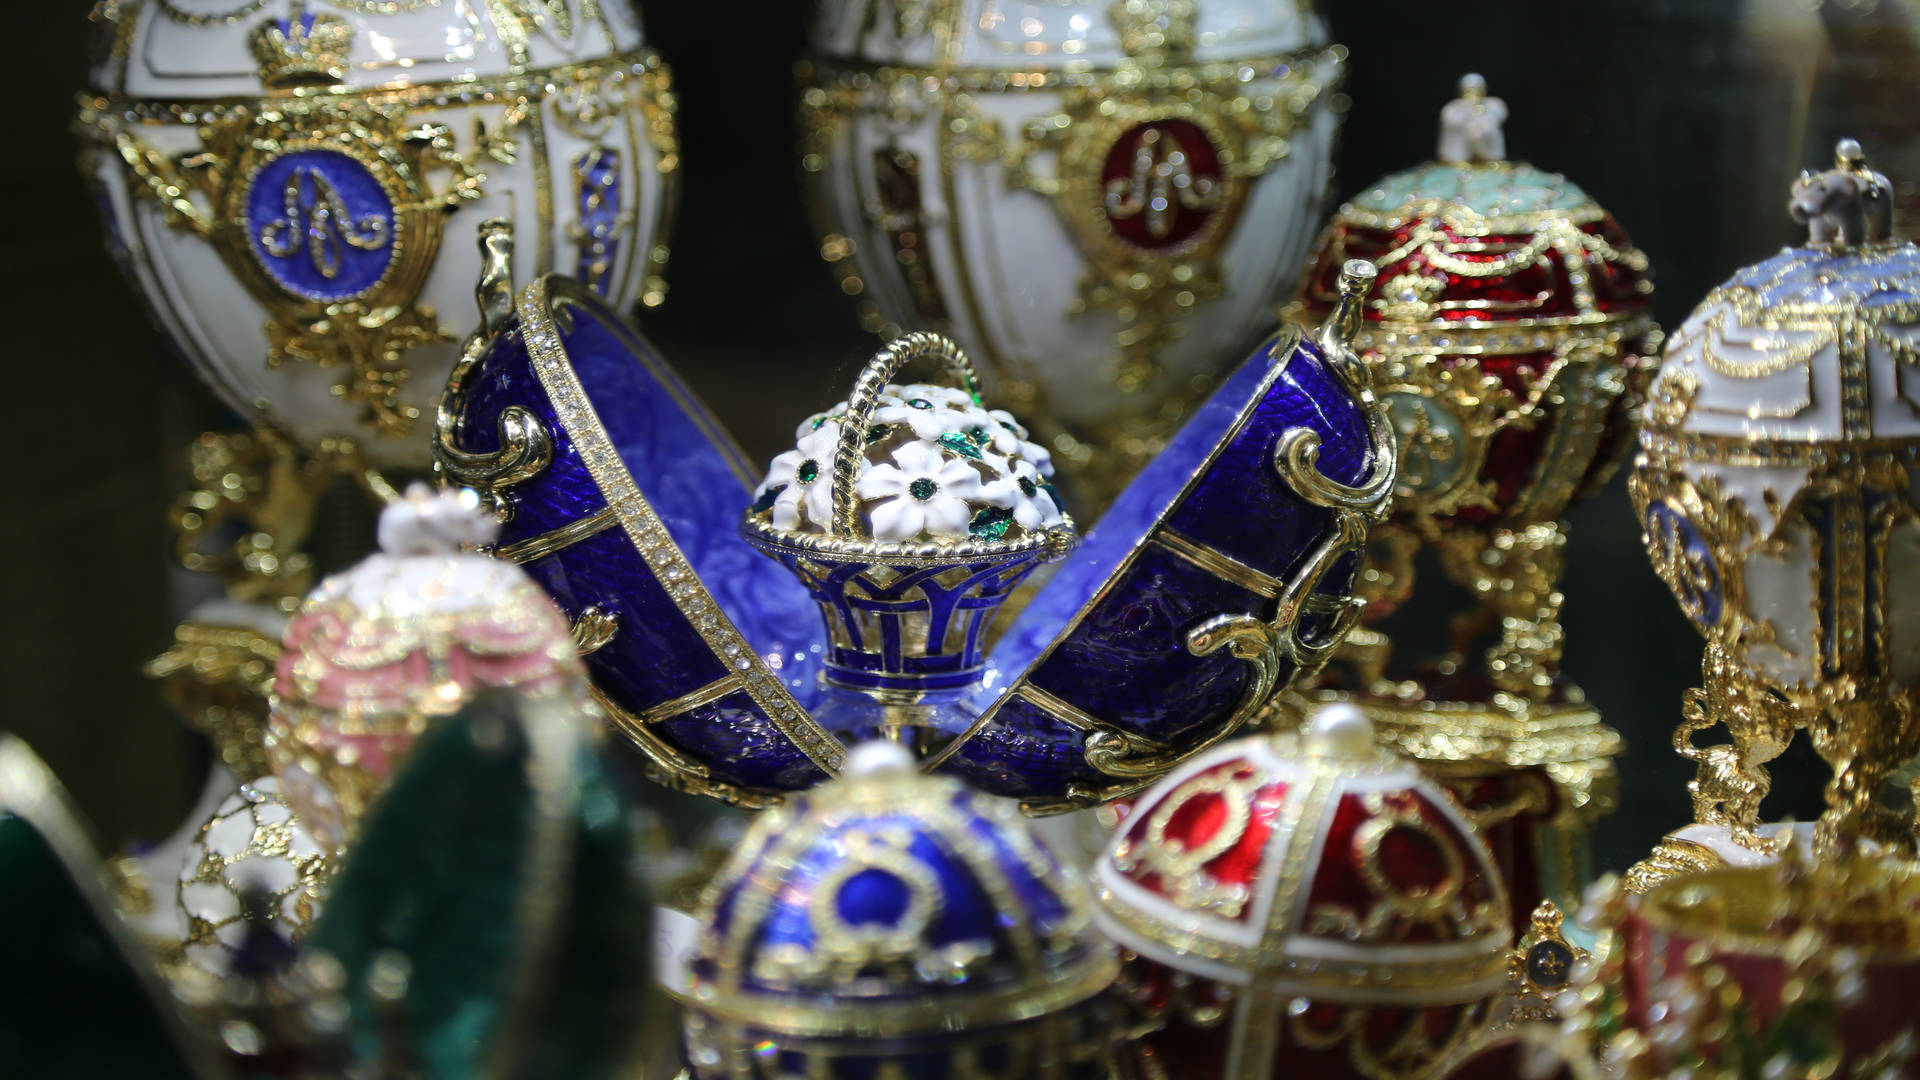 Fabergé eggs displayed in a museum